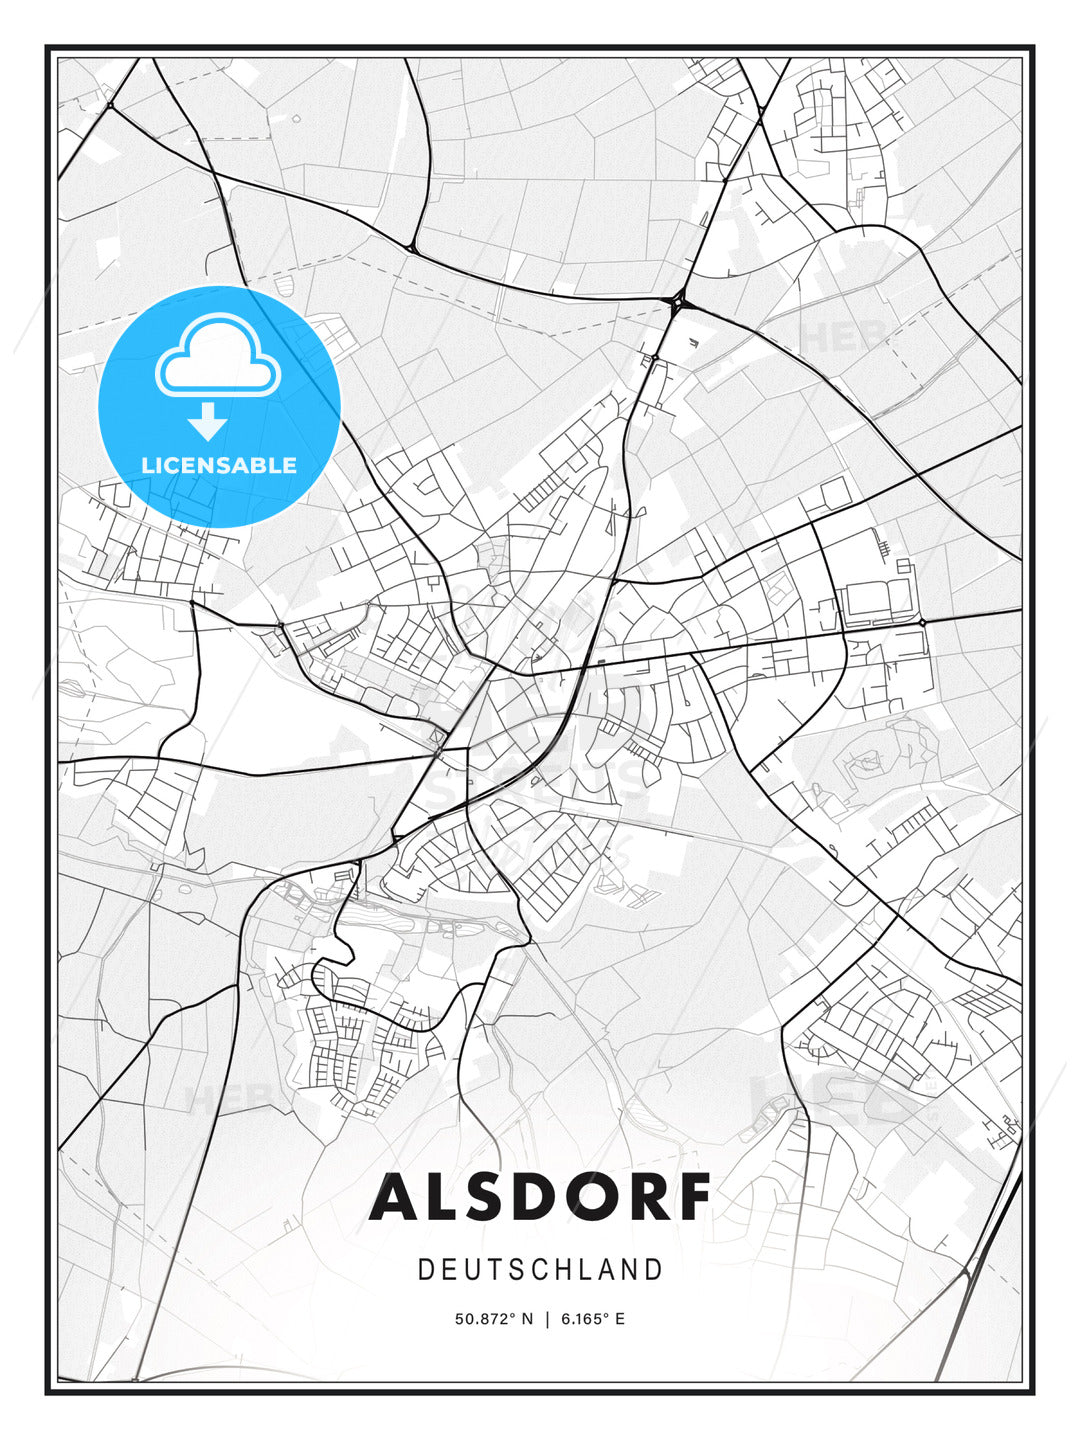 Alsdorf, Germany, Modern Print Template in Various Formats - HEBSTREITS Sketches